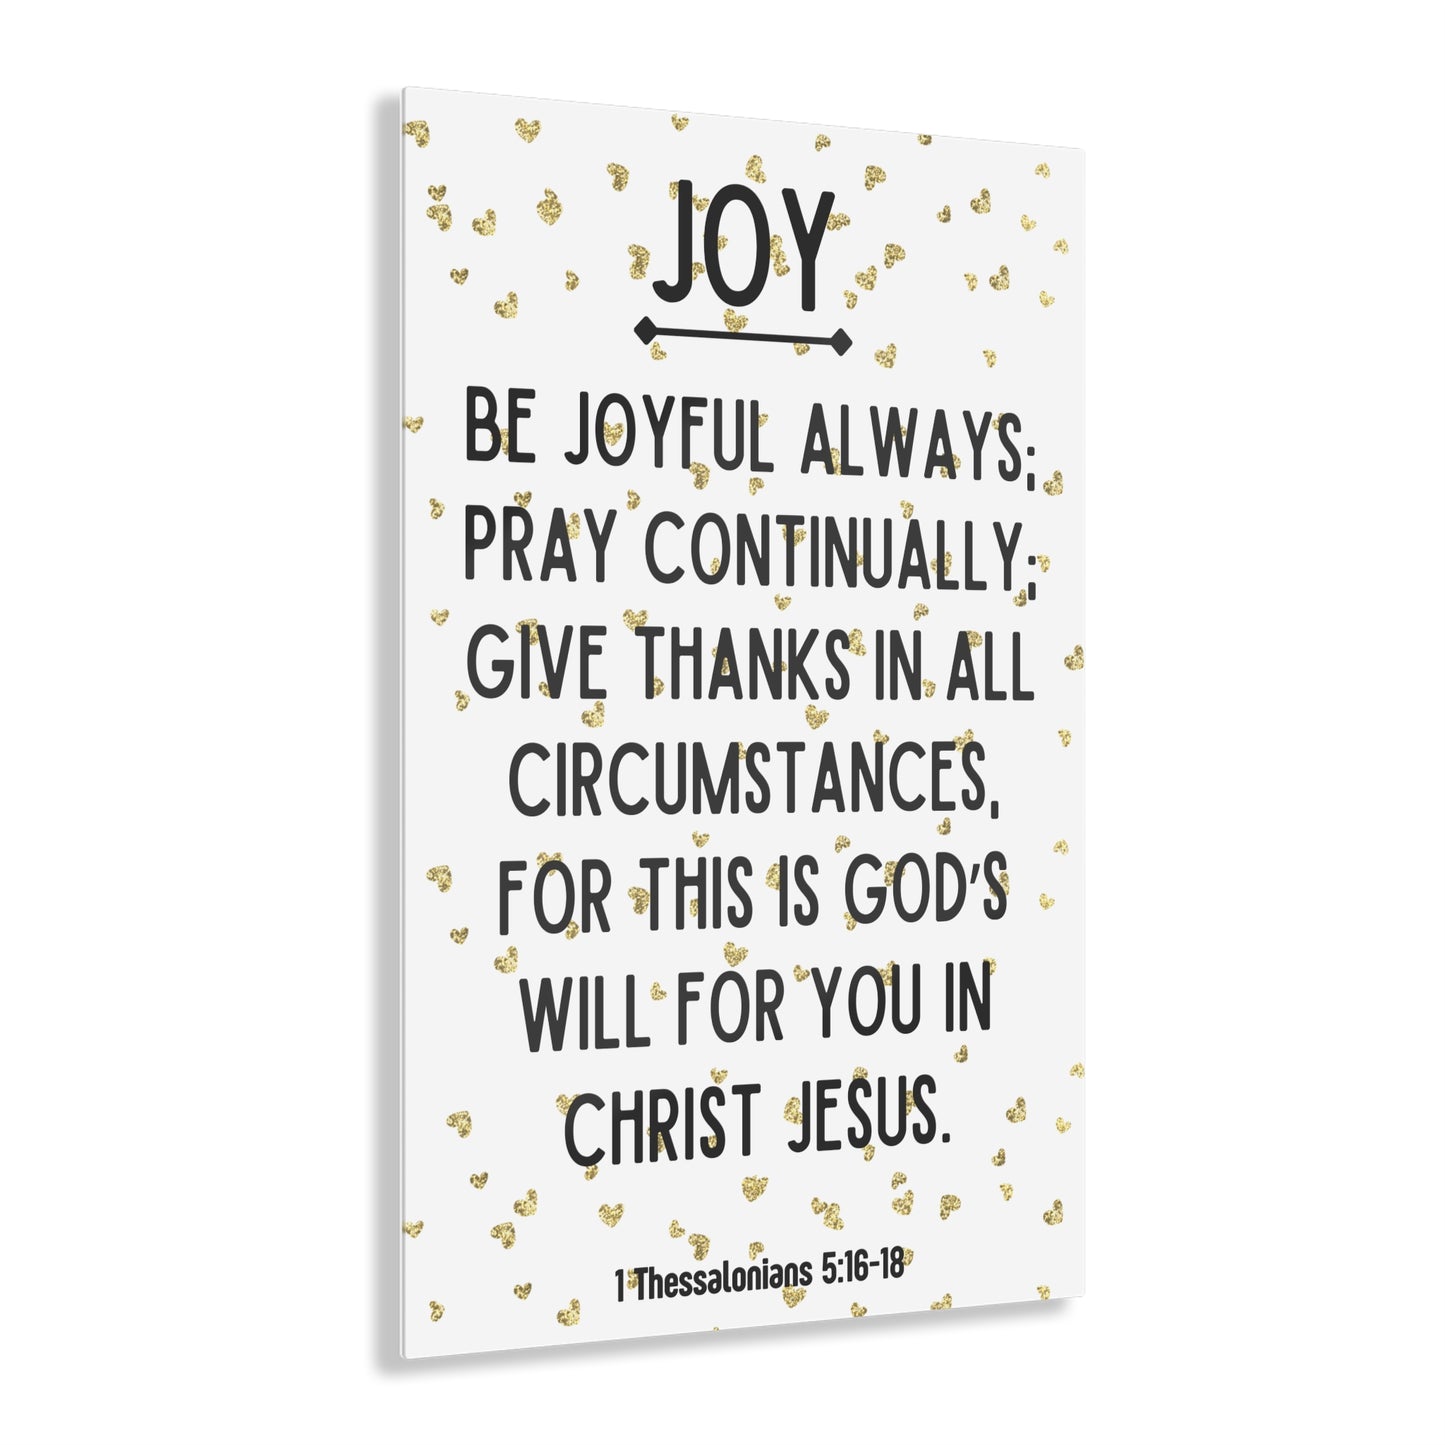 Wall Art Crystal: "Be Joyful Always" Acrylic Print | Art & Wall Decor,Assembled in the USA,Assembled in USA,Decor,Home & Living,Home Decor,Indoor,Made in the USA,Made in USA,Poster